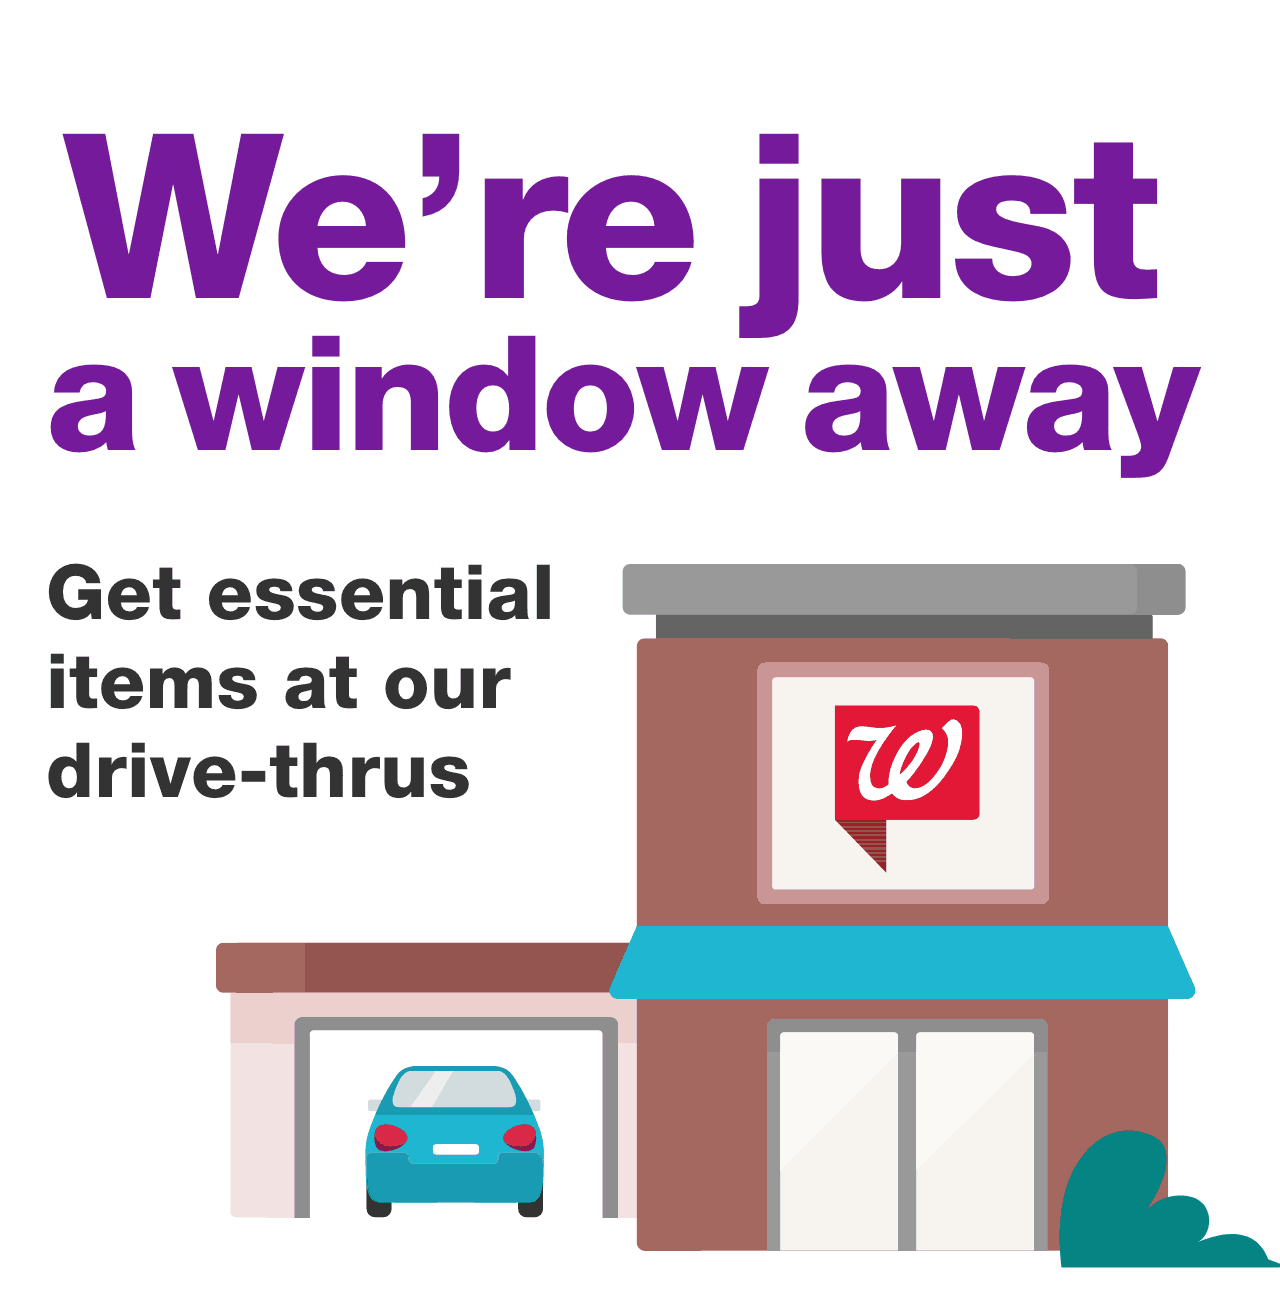 We're just a window away. Get essential items at our drive-thrus